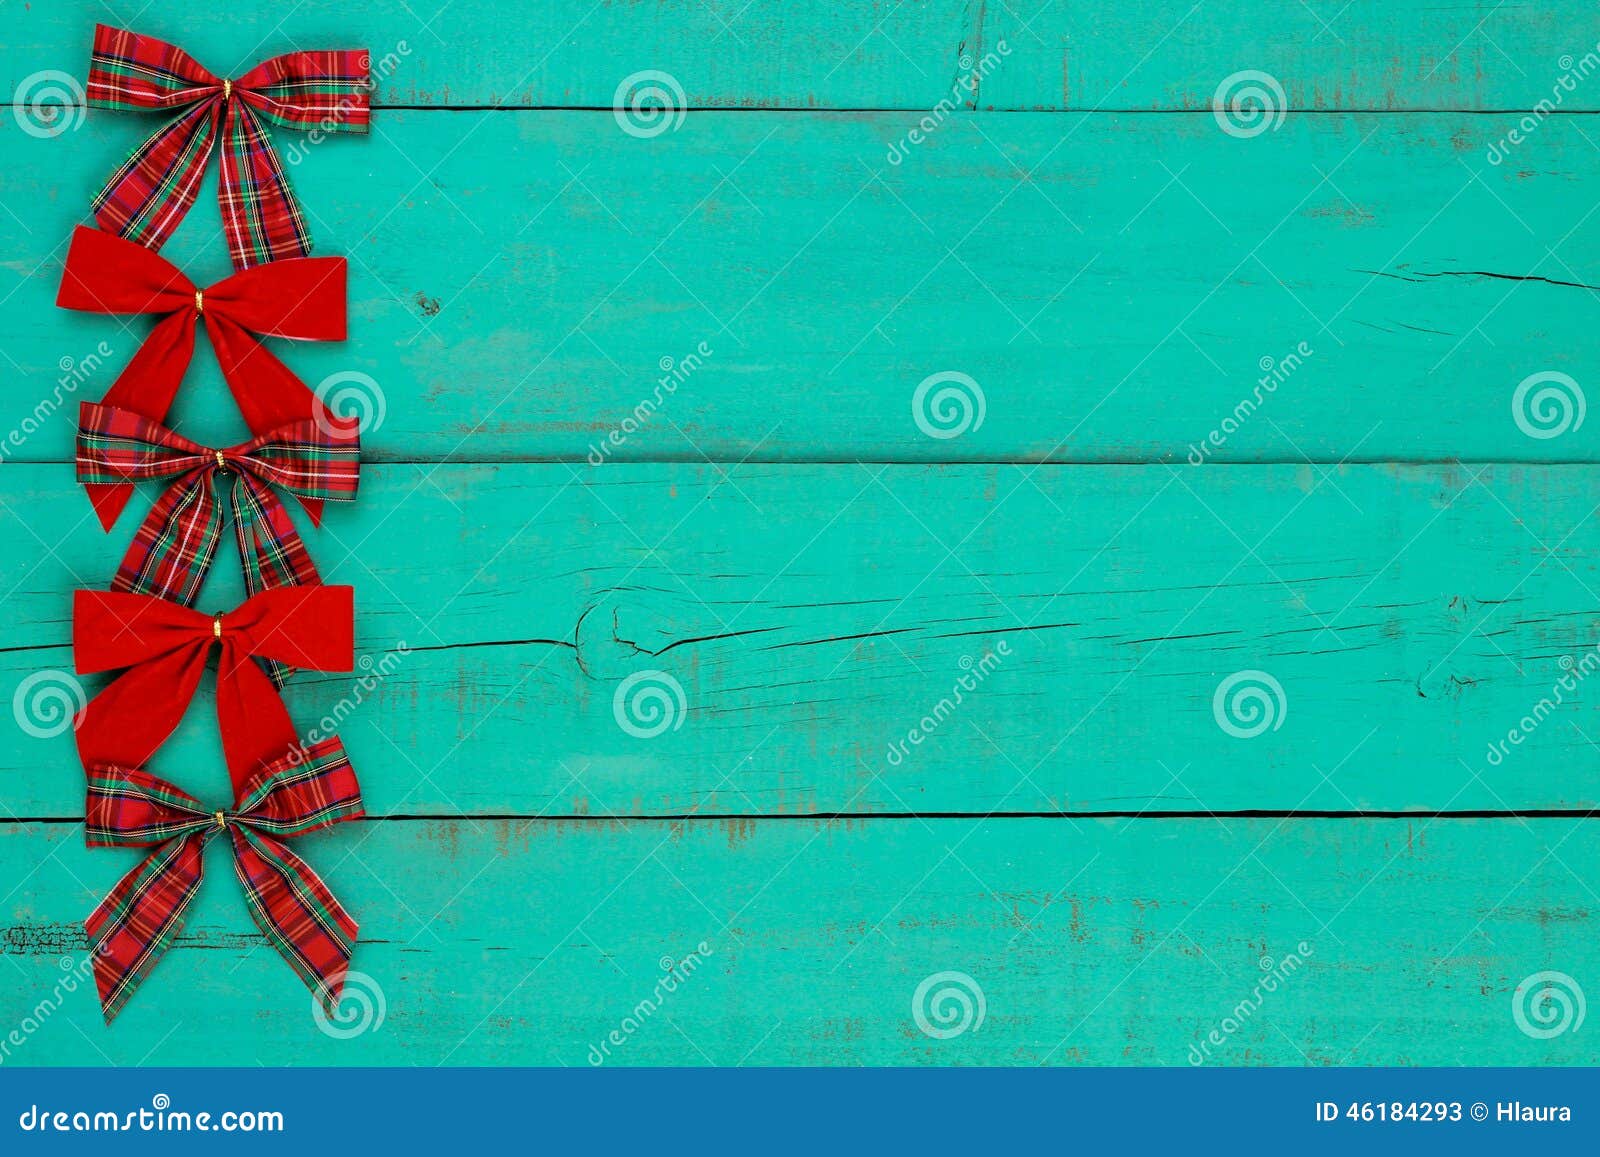 Blank antique green distressed wooden background with red plaid and velvet Christmas bow border